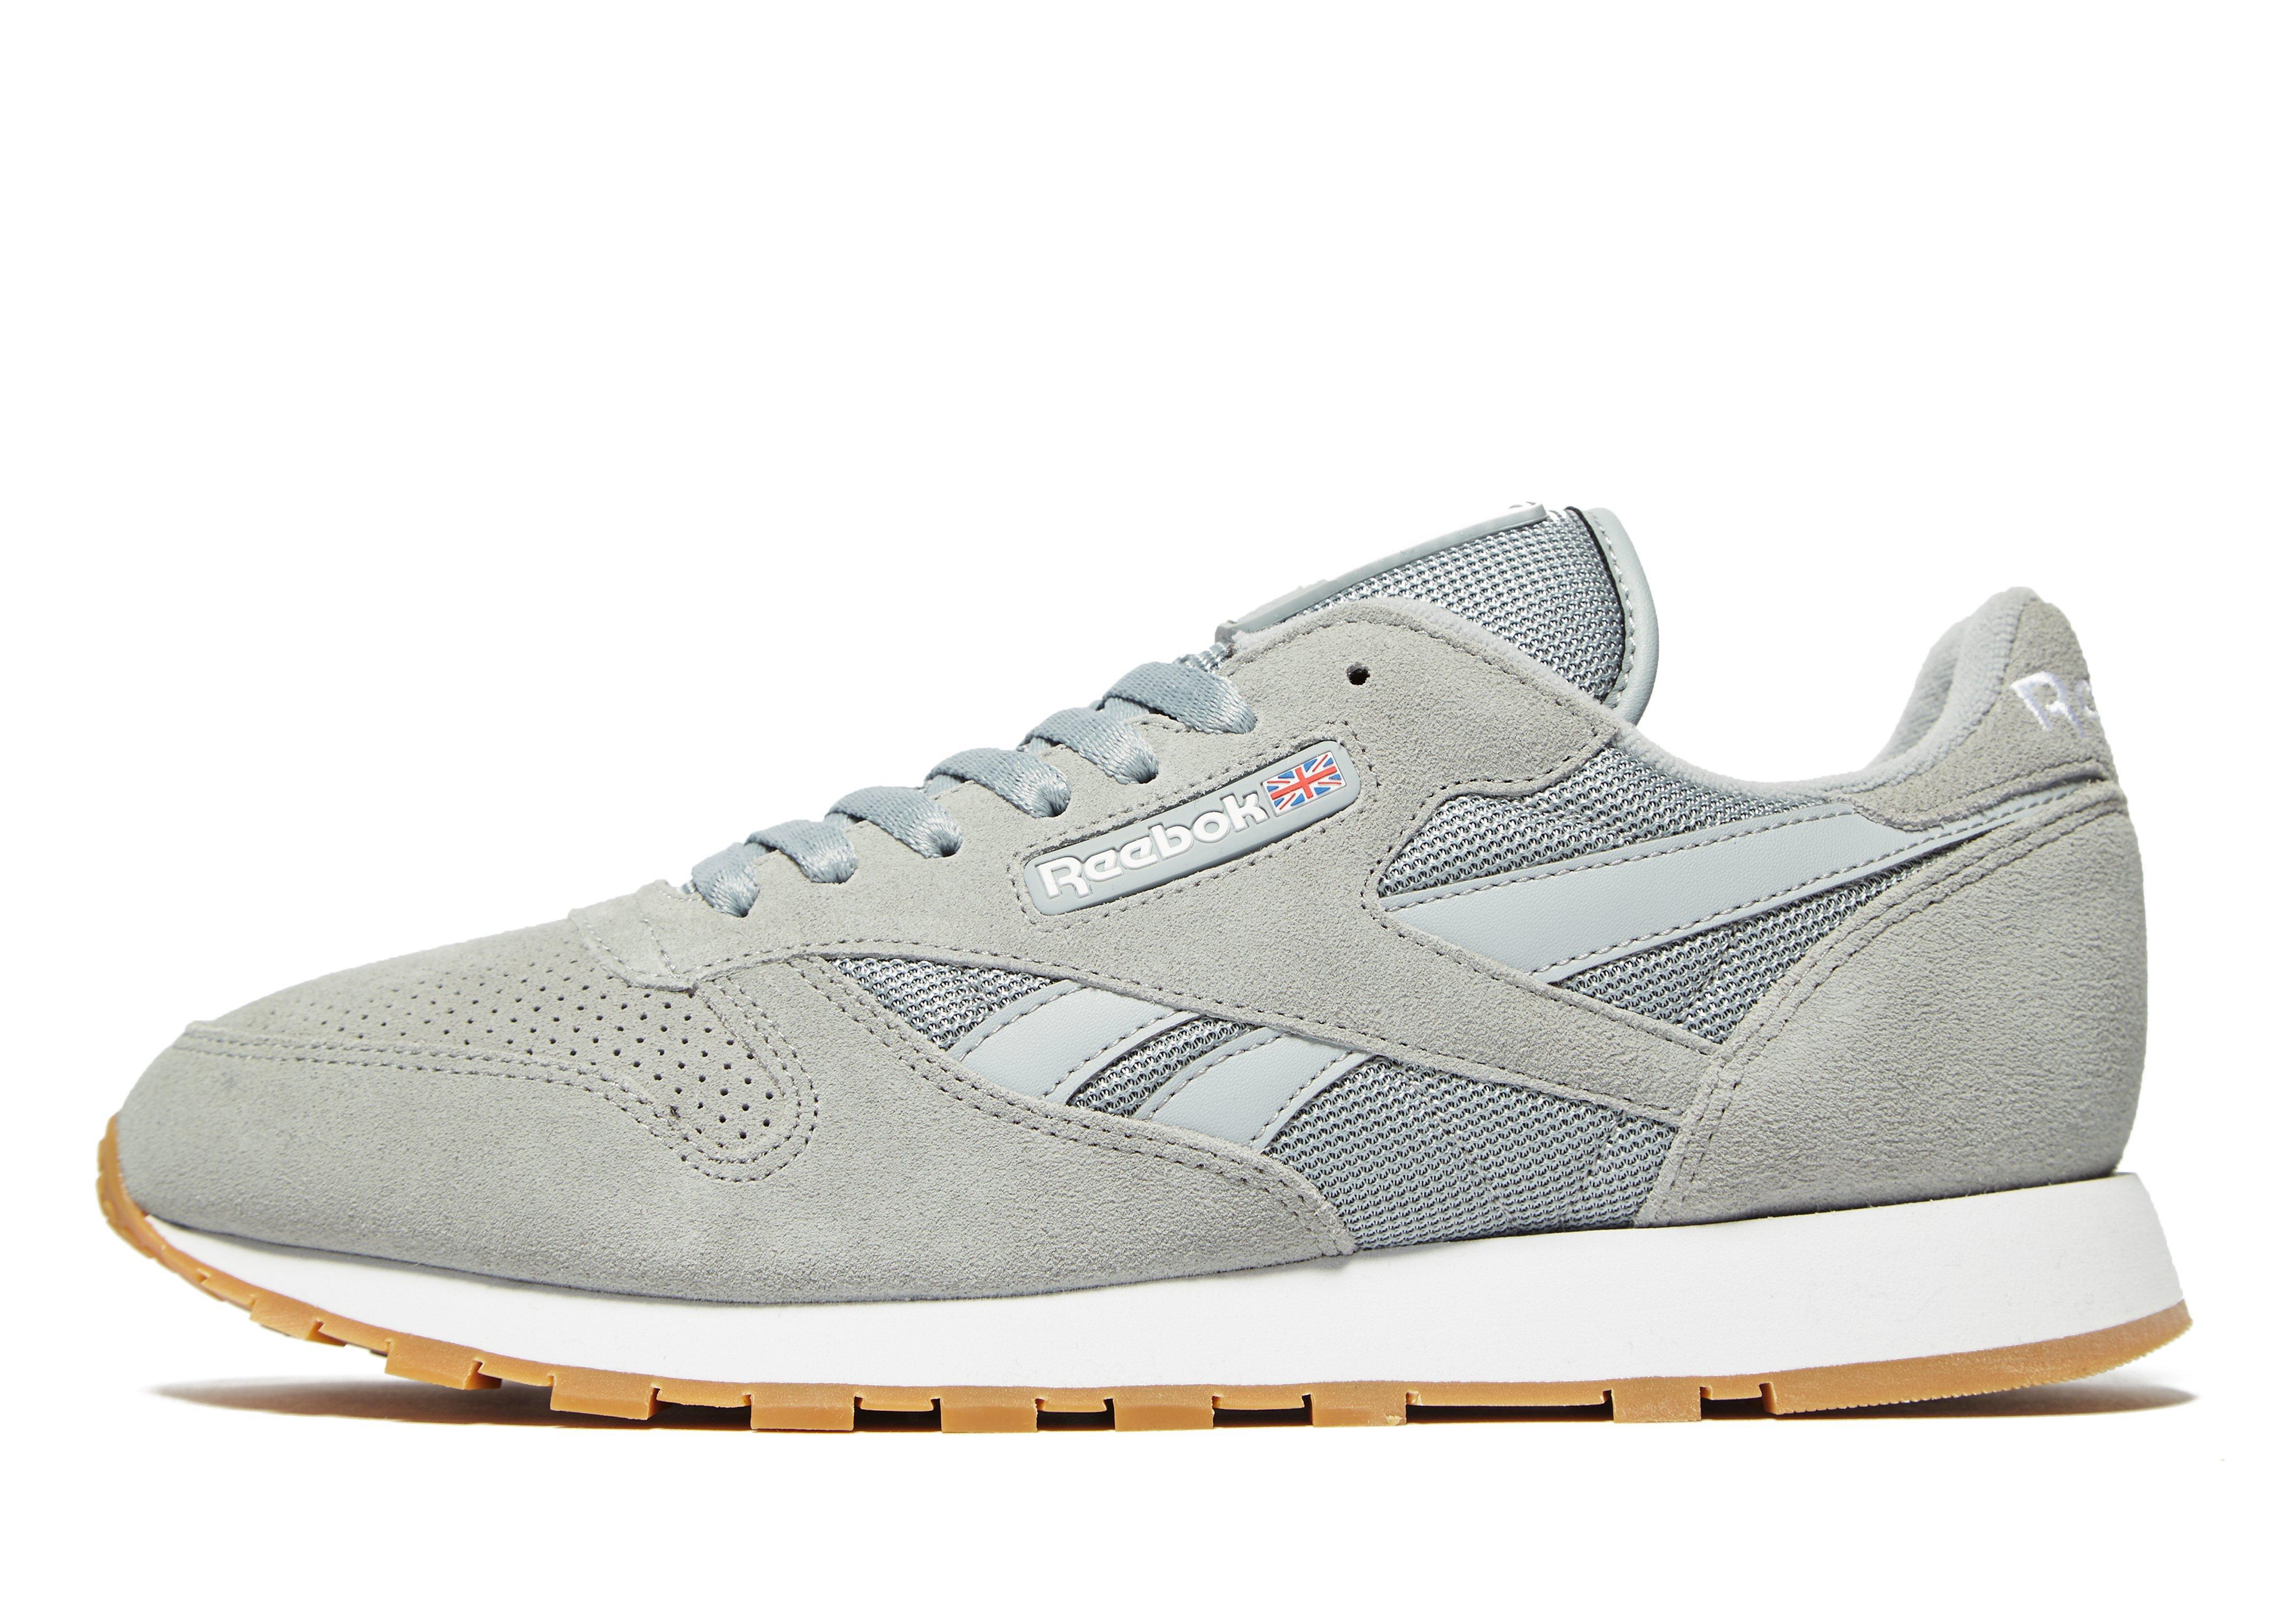 Reebok Suede Classic Sg in Grey (Gray) for Men - Lyst